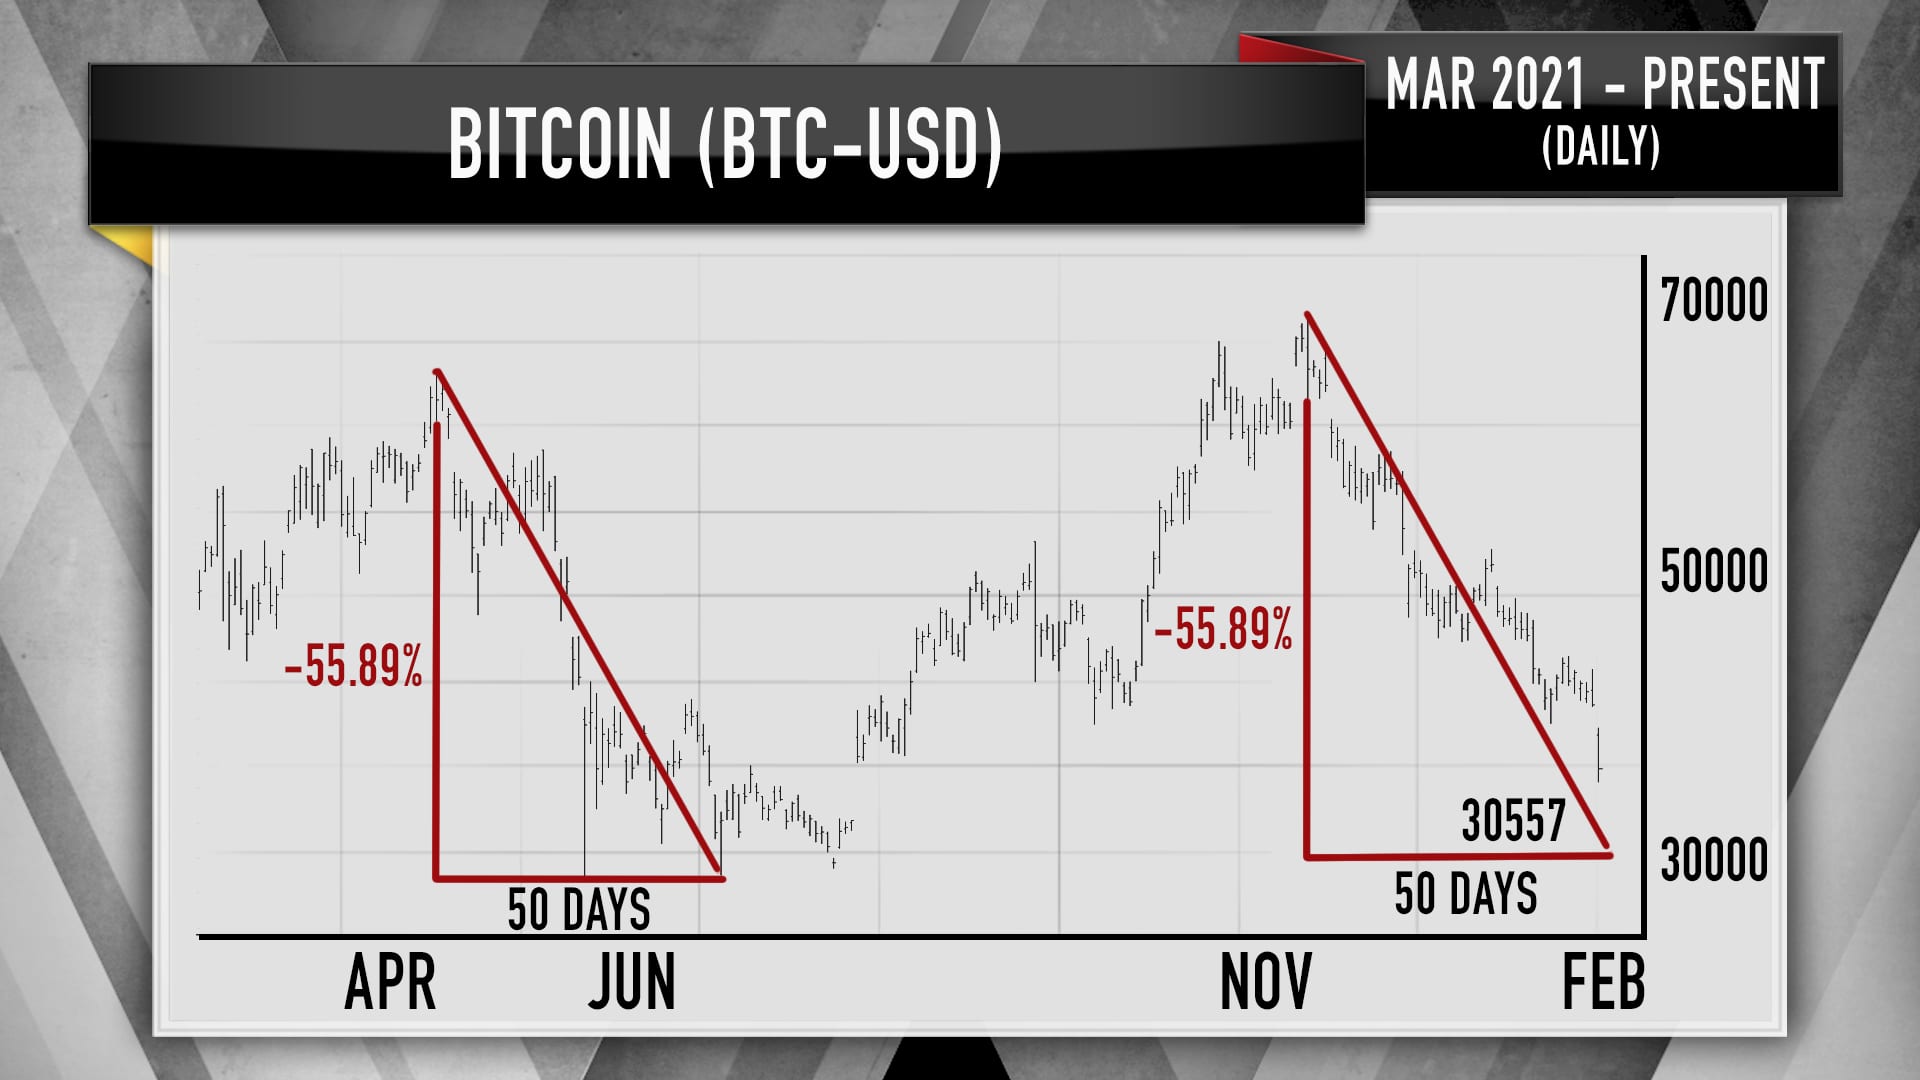 Technical analysis from Tom DeMark showing bitcoin's angle of descent. 